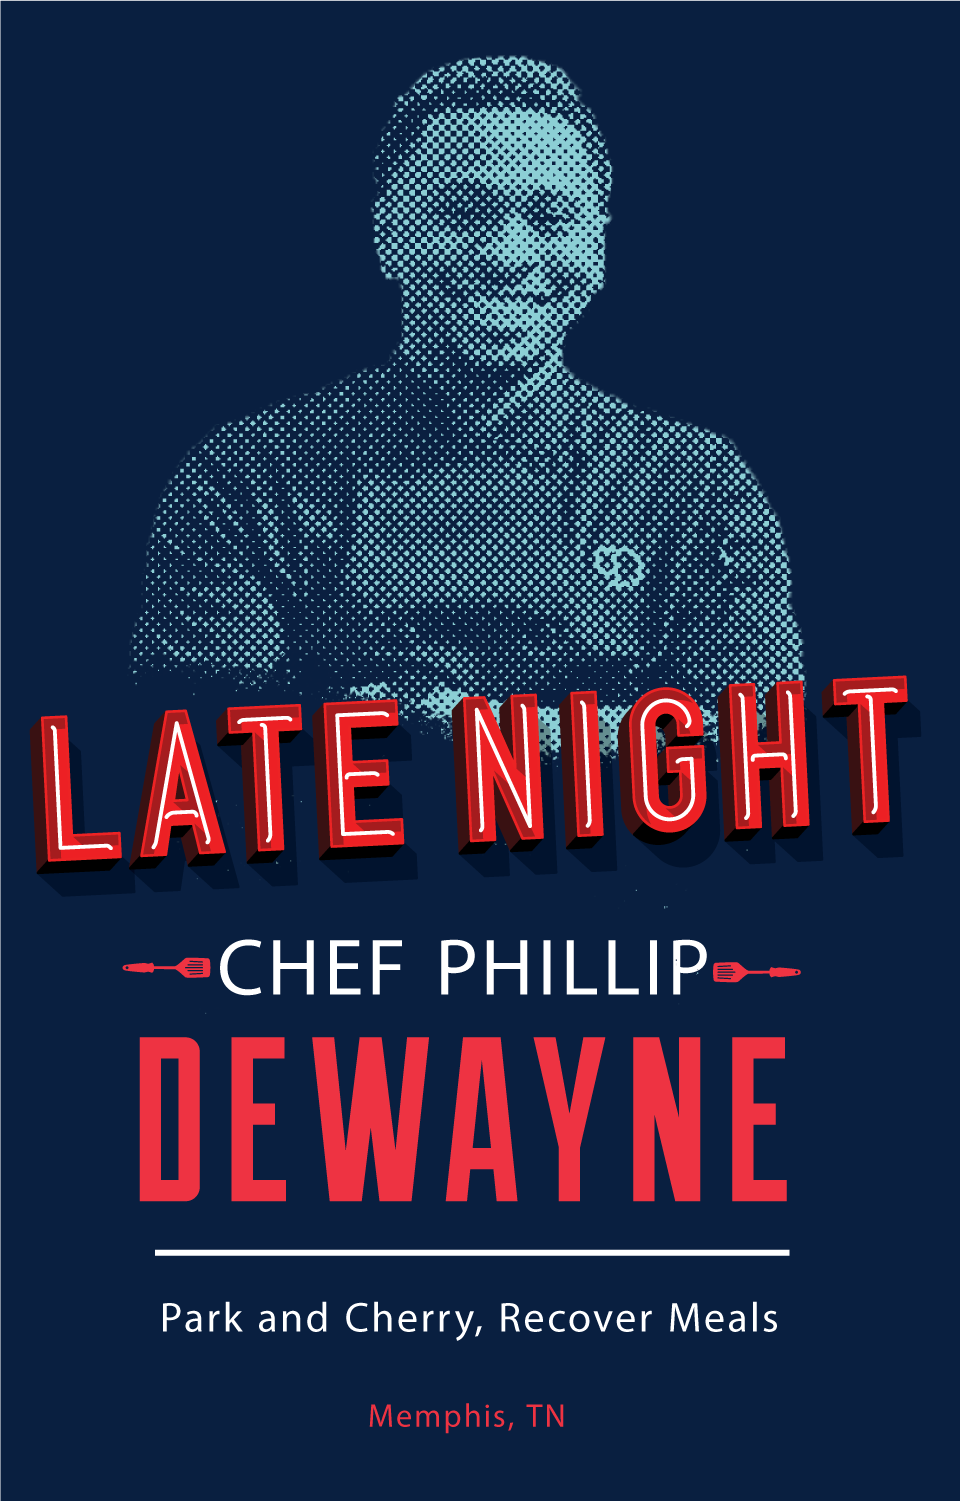 LBC-23-13657-05-Template-Chef-Headshots_AfterParty.png